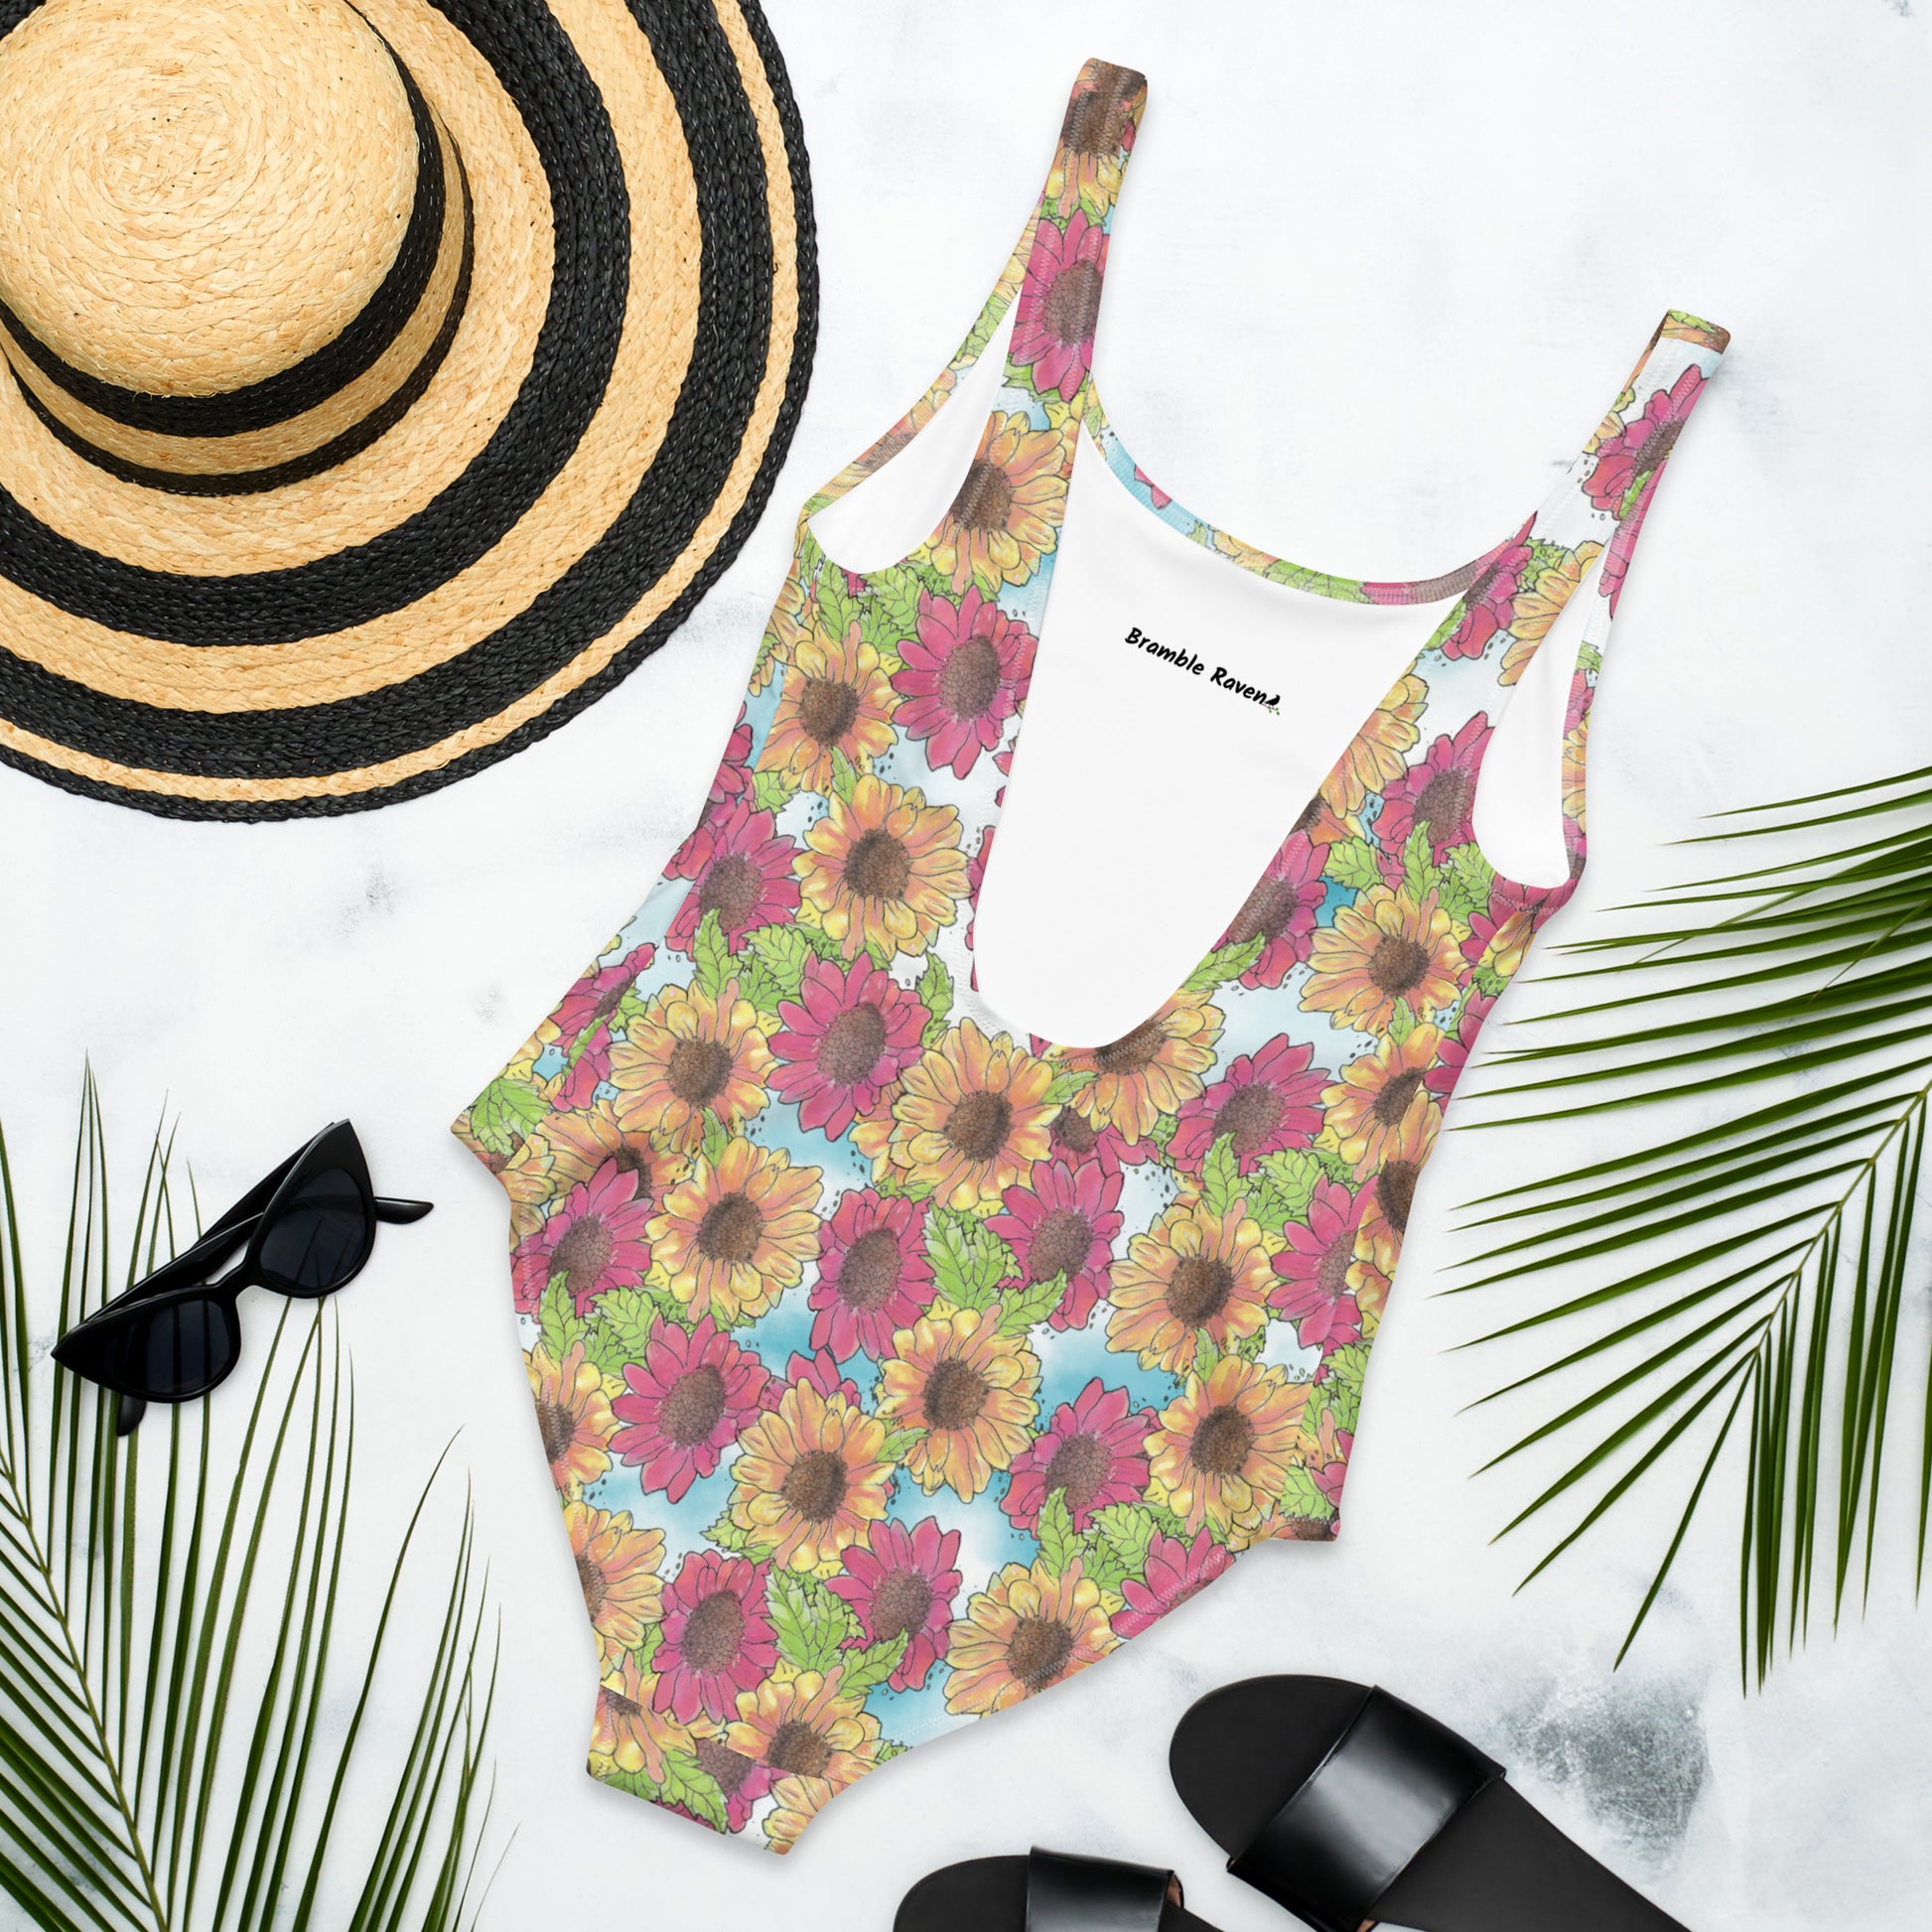 Gerber daisies one piece women's scoop back swimsuit. Yellow and red watercolor gerber daisies print. Back flat lay view by sunhat, sunglasses, and sandals. Available in XS to 3XL.